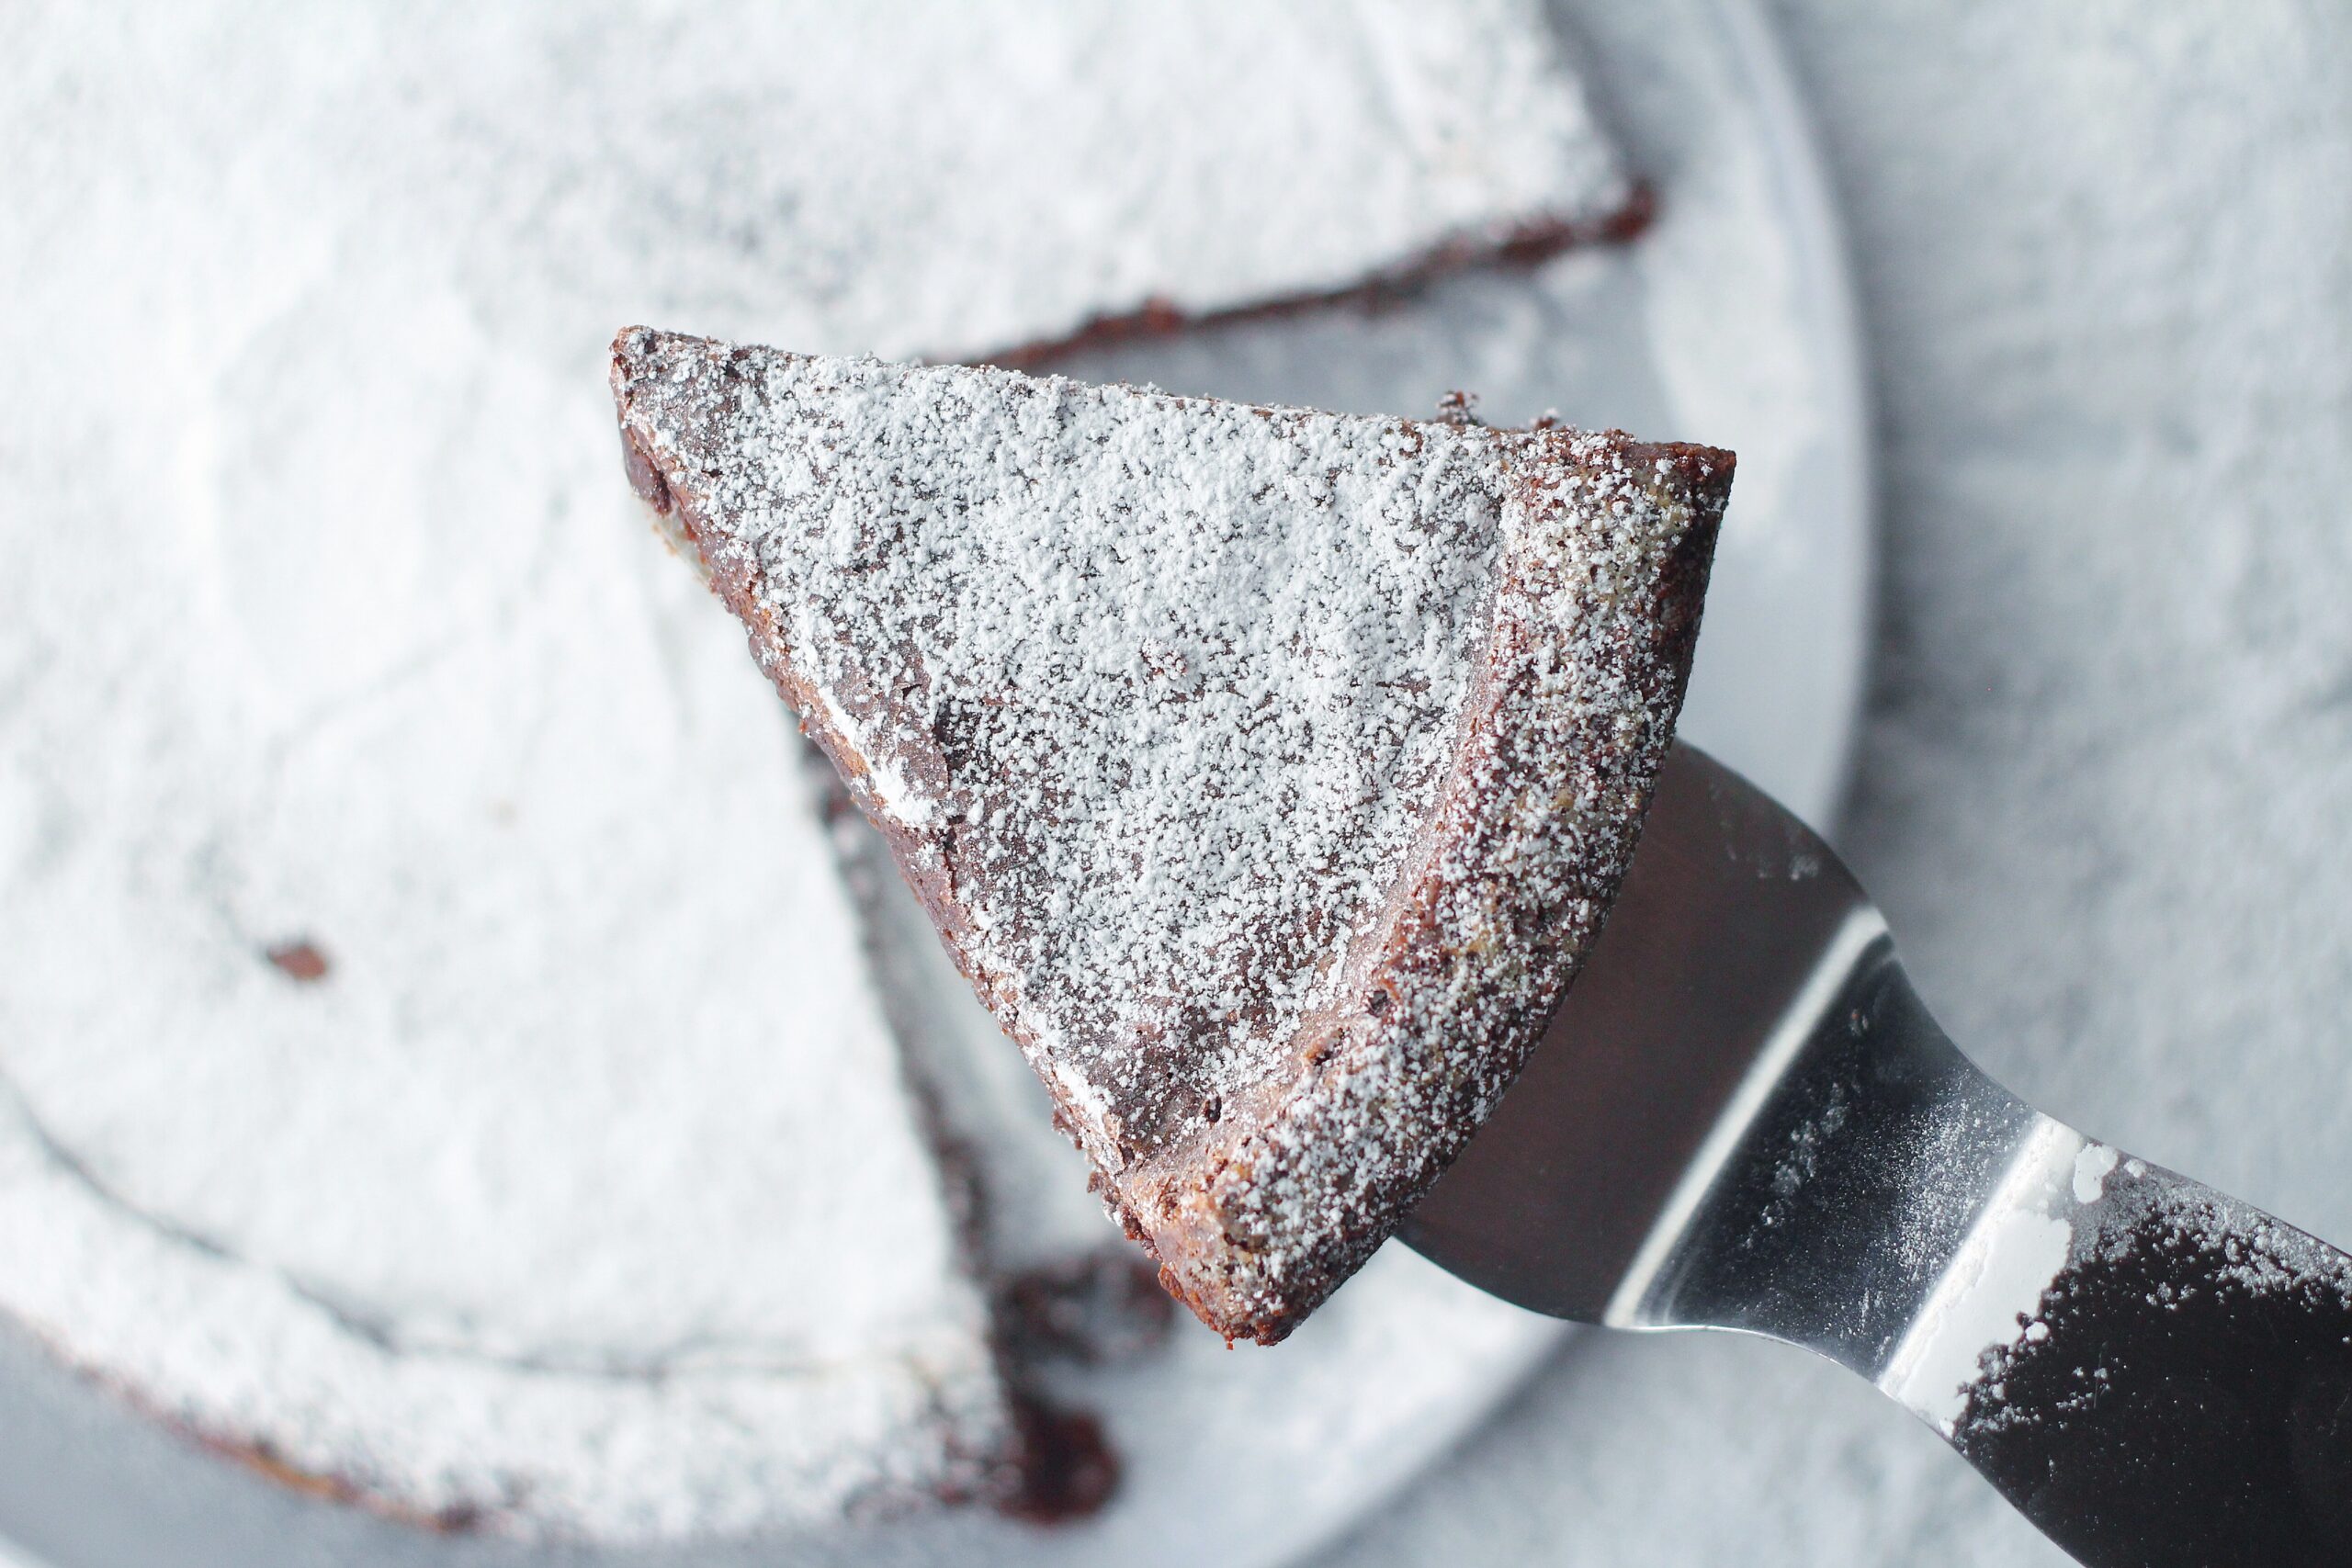 Once slice of flourless chocolate cake on a cake server held above the rest of the flourless chocolate cake blurred in the background. Both the slice and full cake are covered in powdered sugar. The full cake is sitting on a round, grey plate on top of a marbled surface